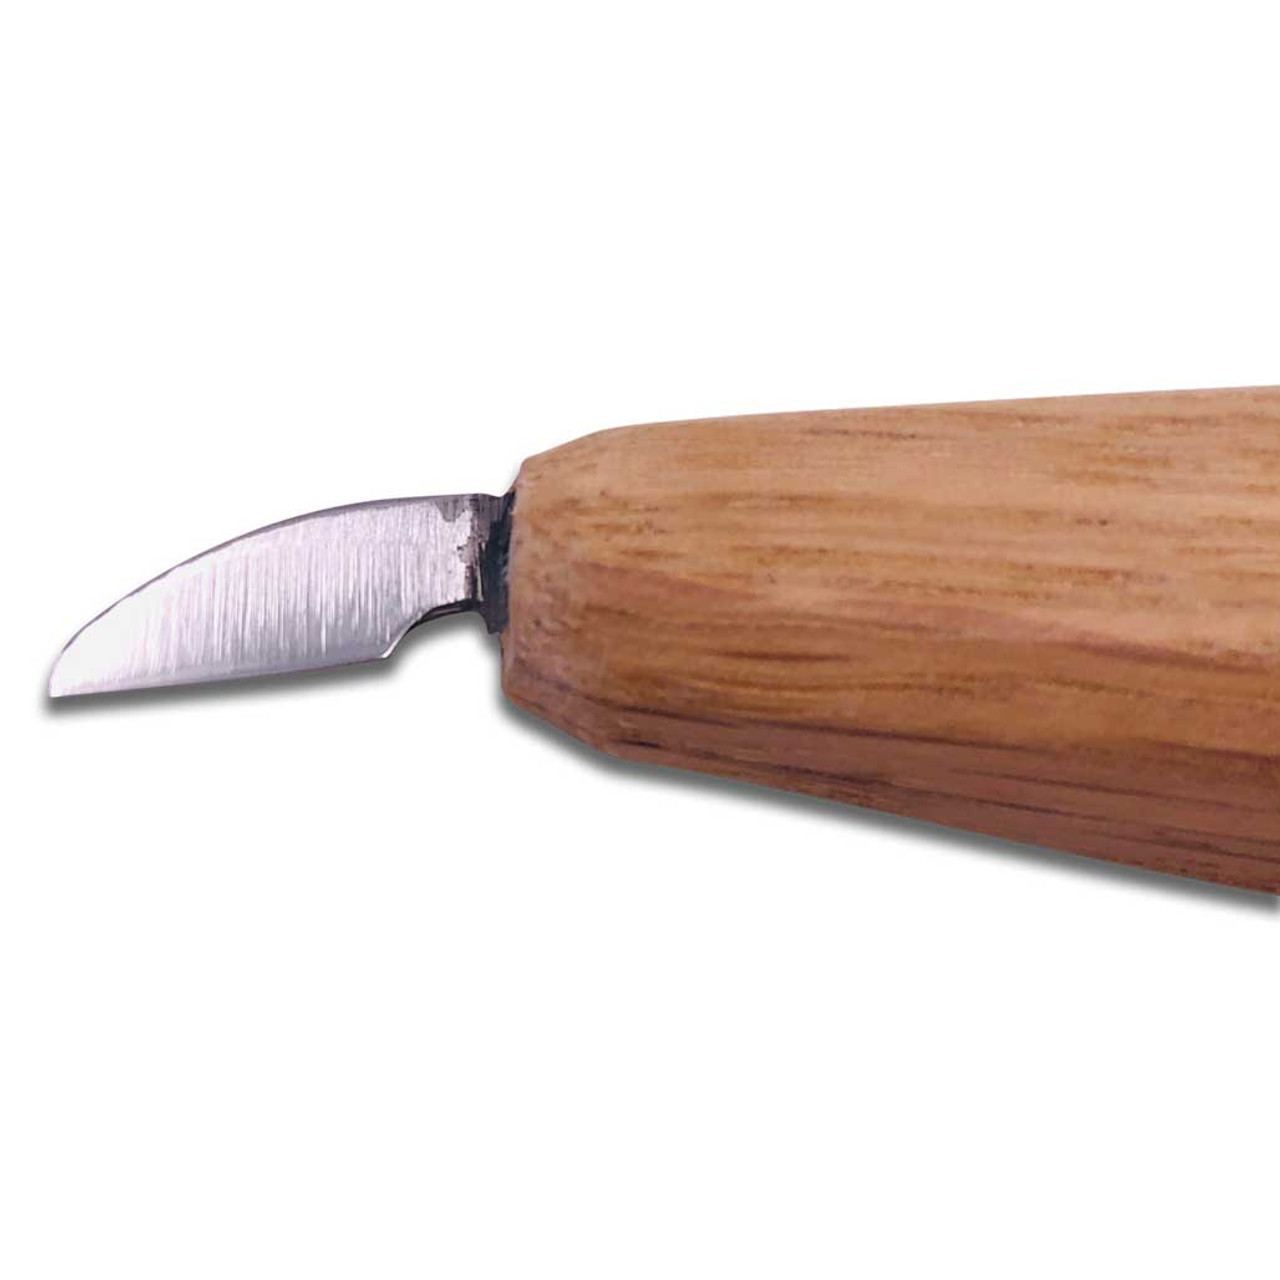 9 Carving Knife, Yew Wood Handle